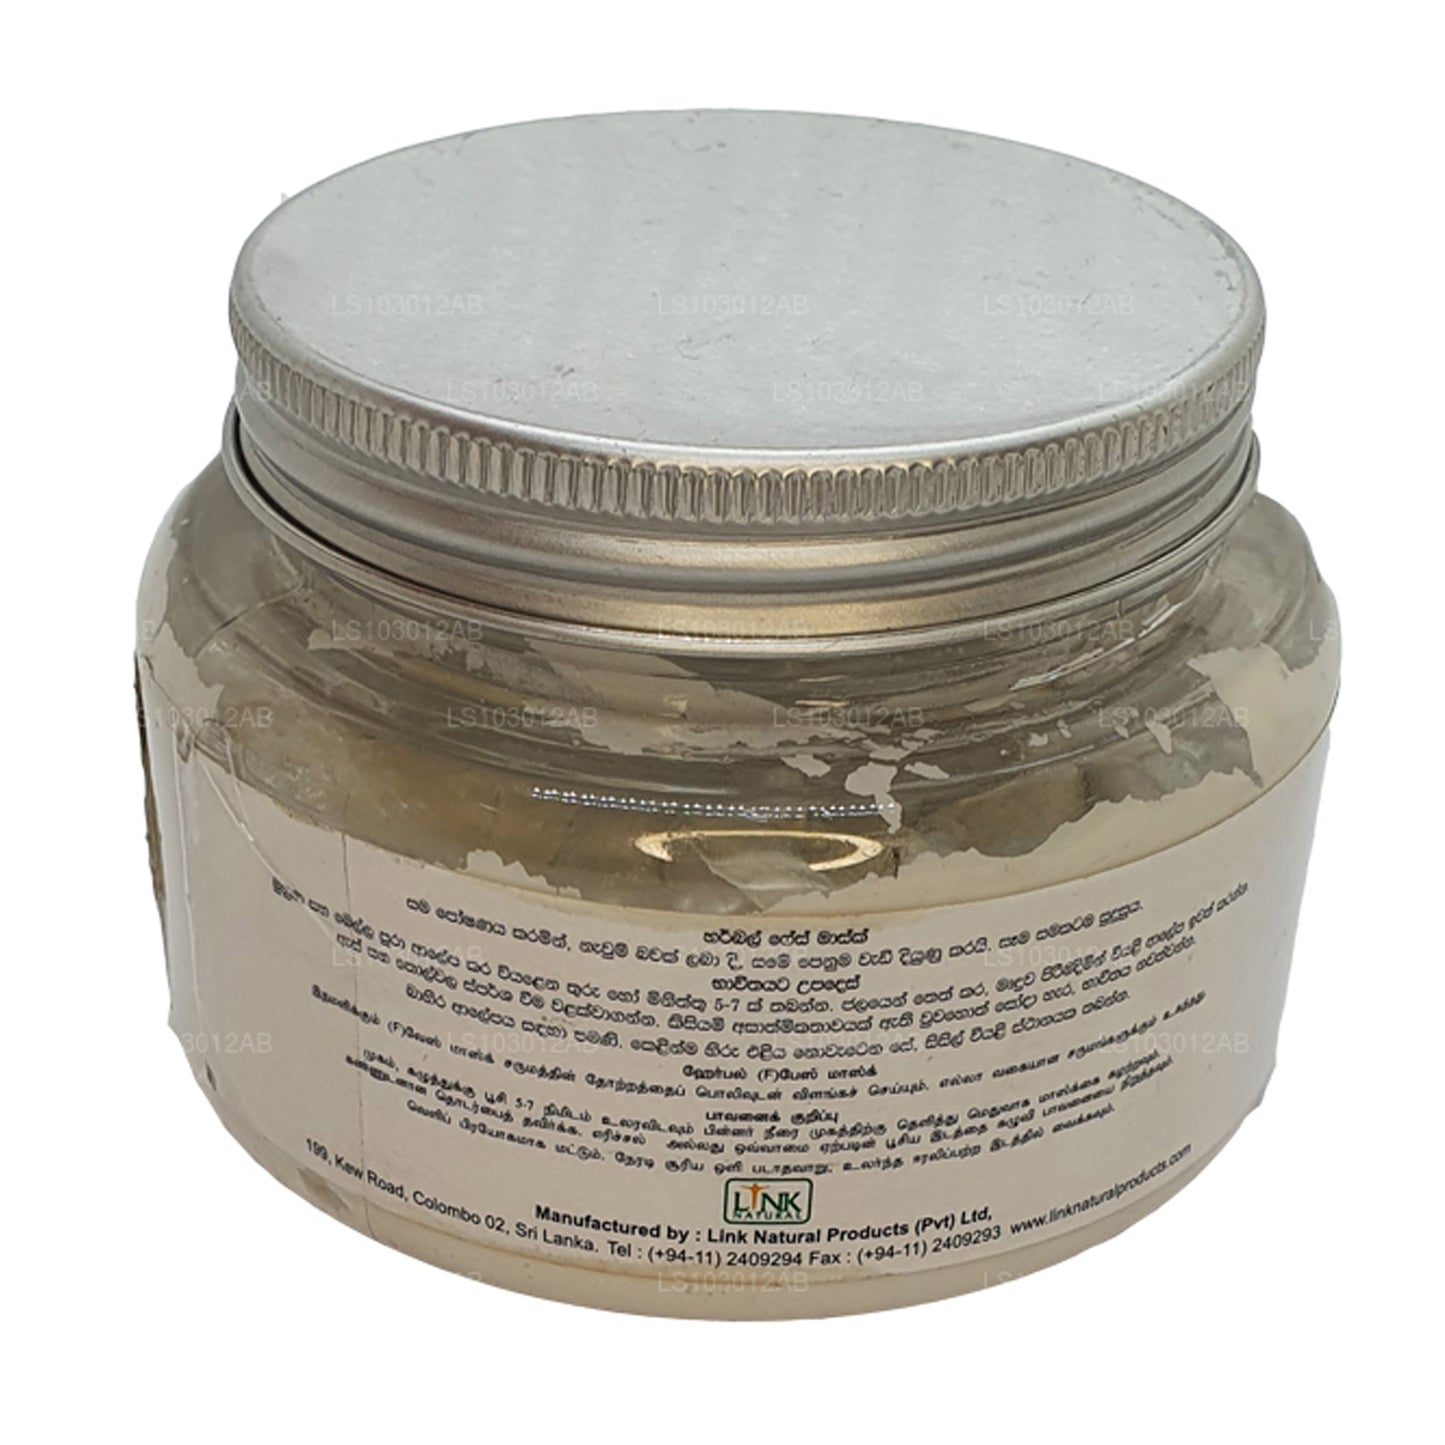 Masque facial aux herbes Link Natural Earth Essence (200 g)